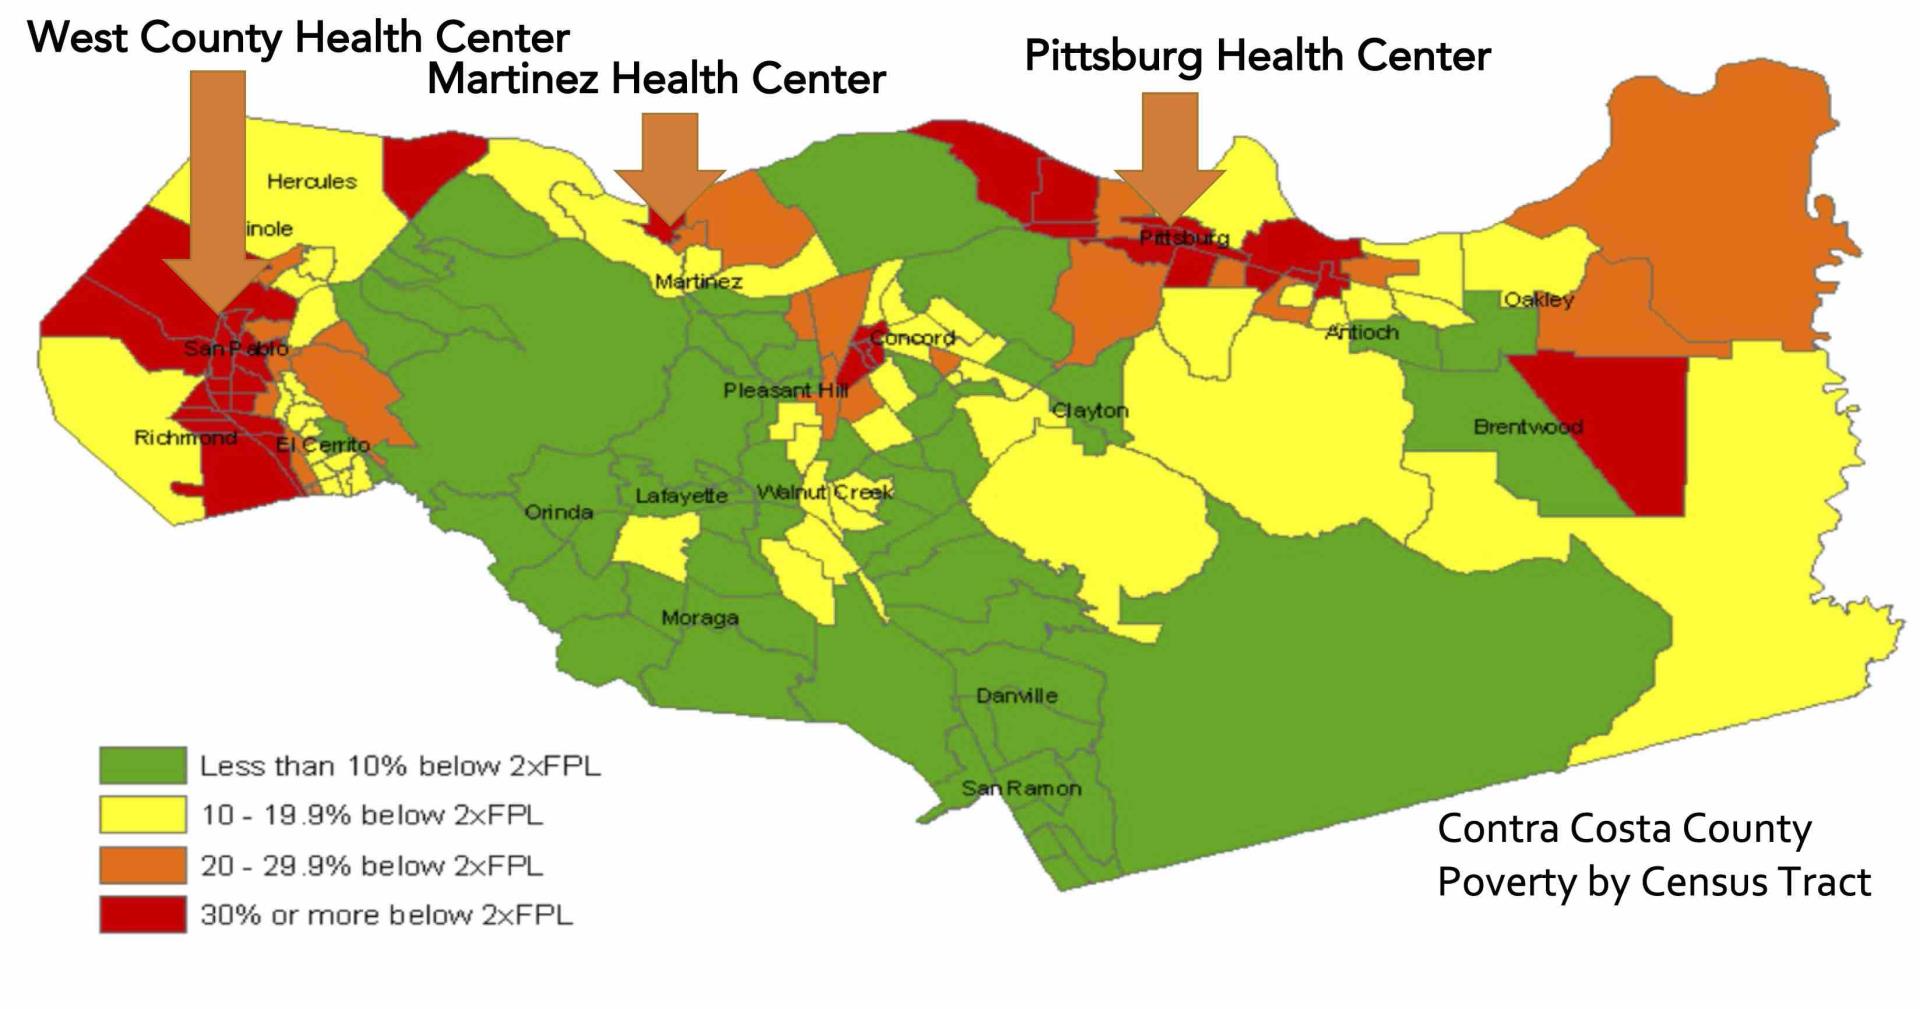 Map showing location of resident clinics relative to lower income areas of Contra Costa county